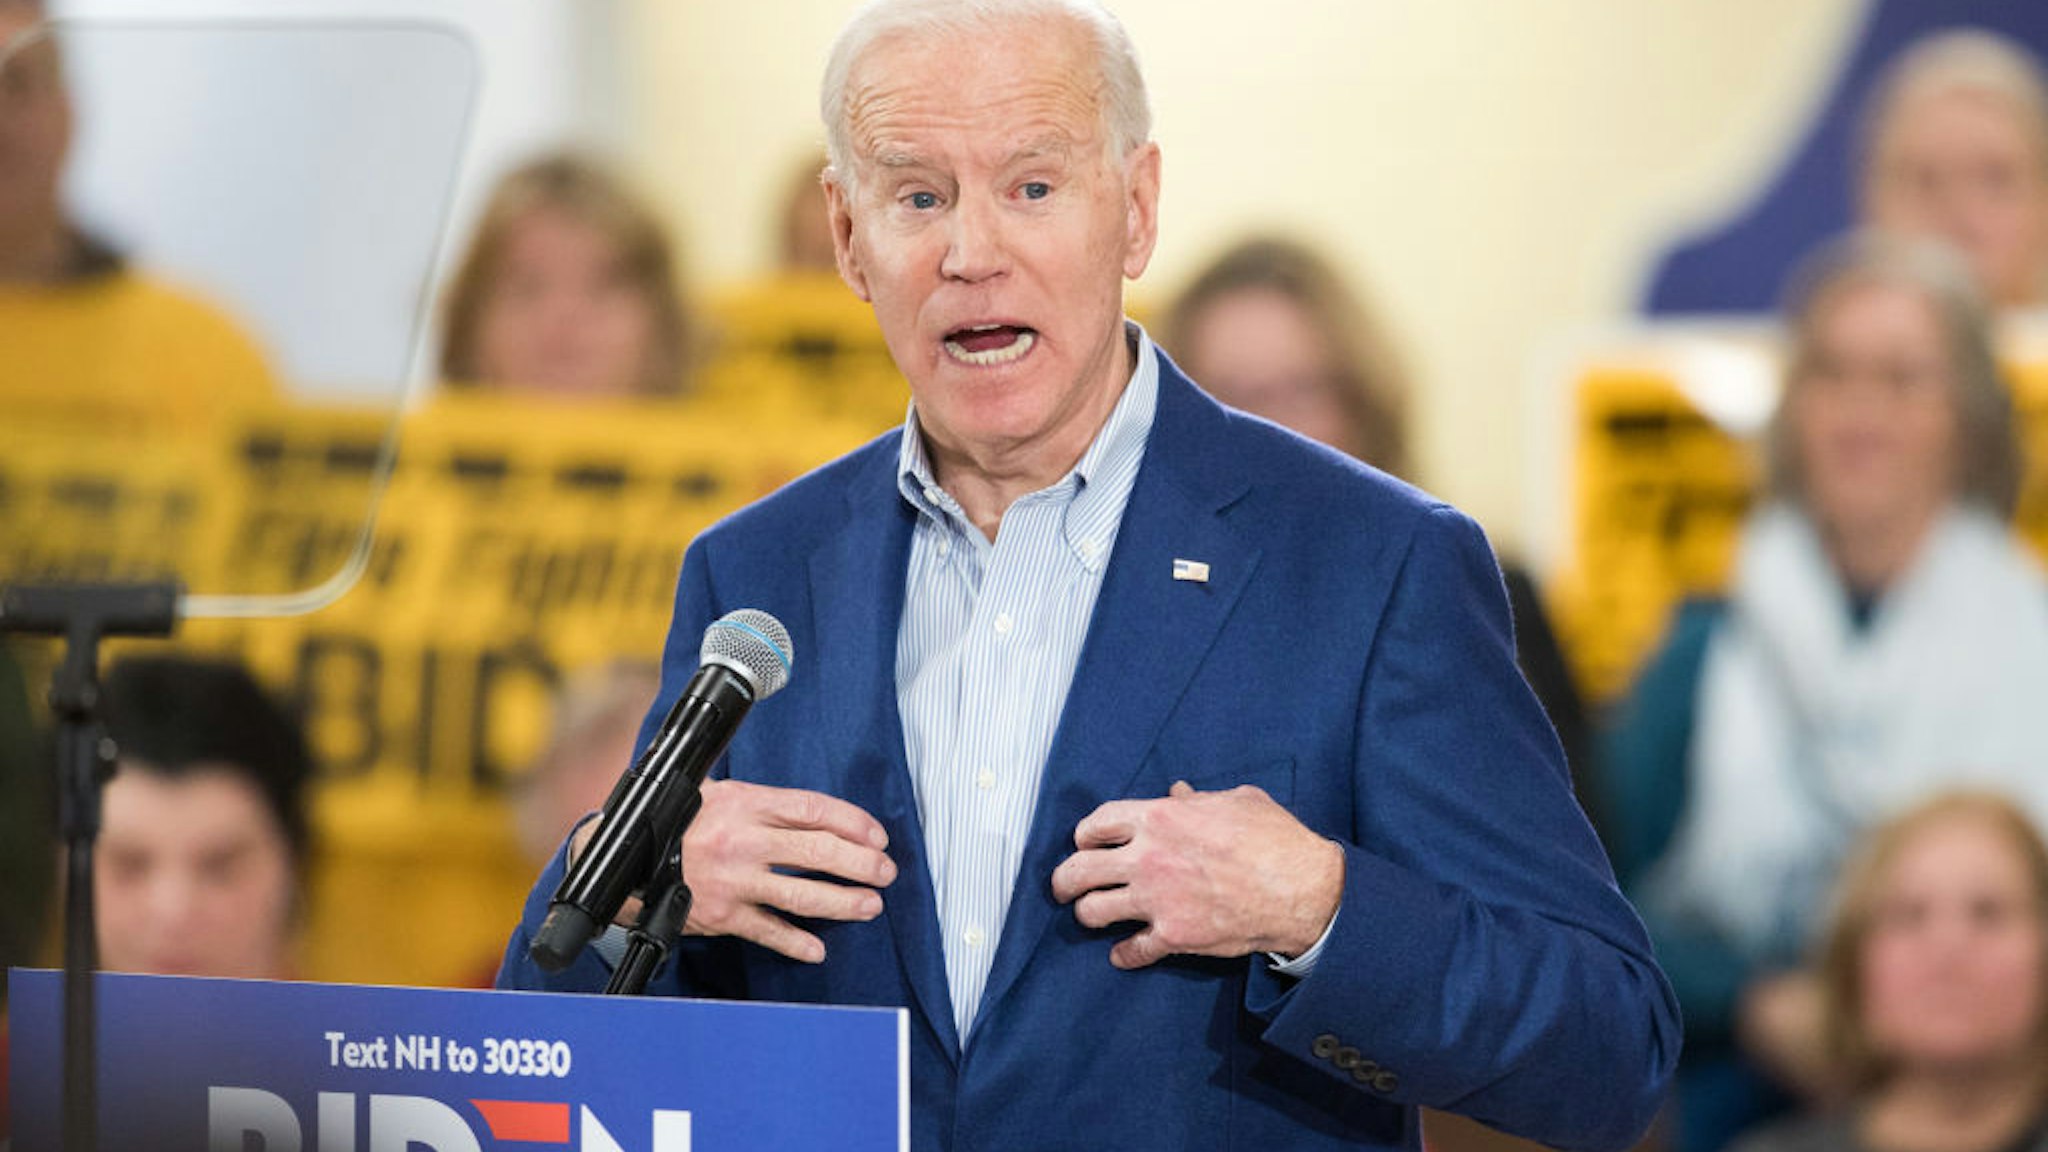 Democratic presidential candidate former Vice President Joe Biden speaks during a campaign event on February 10, 2020 in Manchester, New Hampshire.